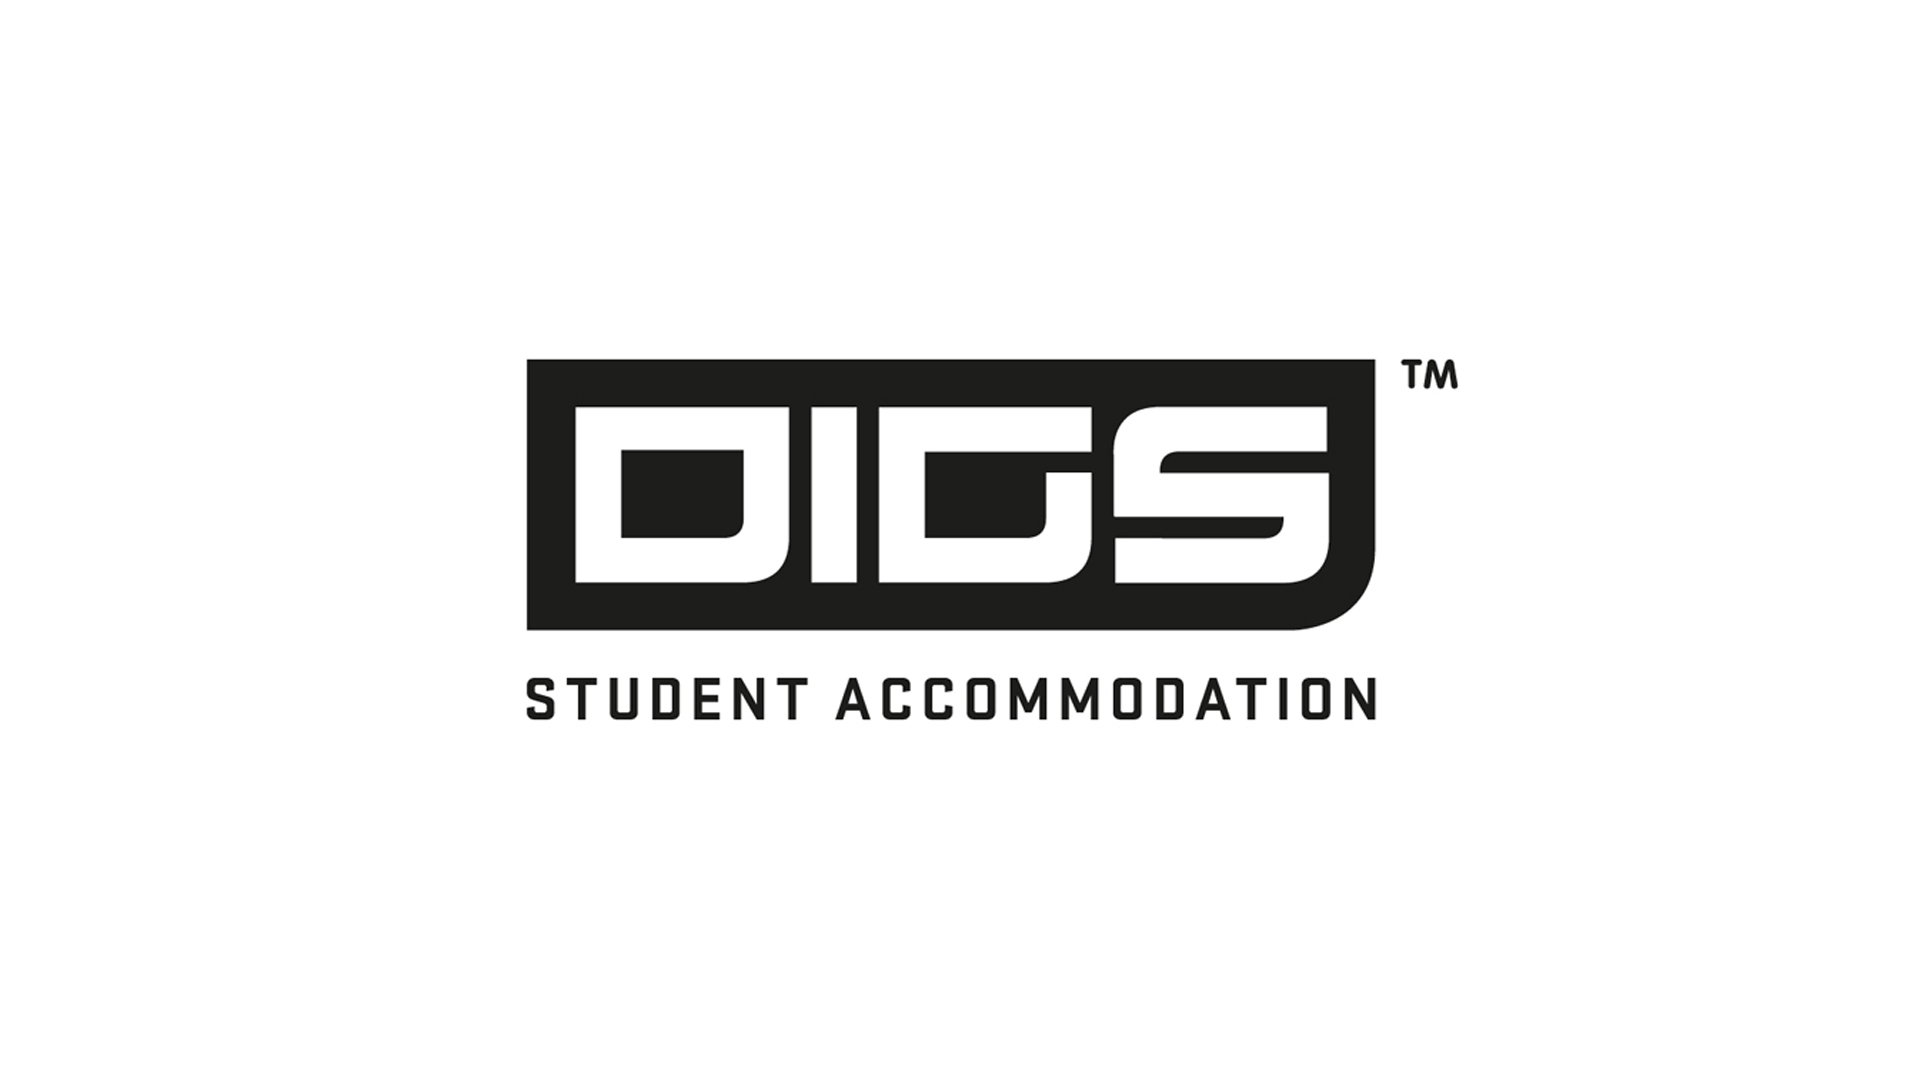 A black DIGS student accommodation logo on a white background